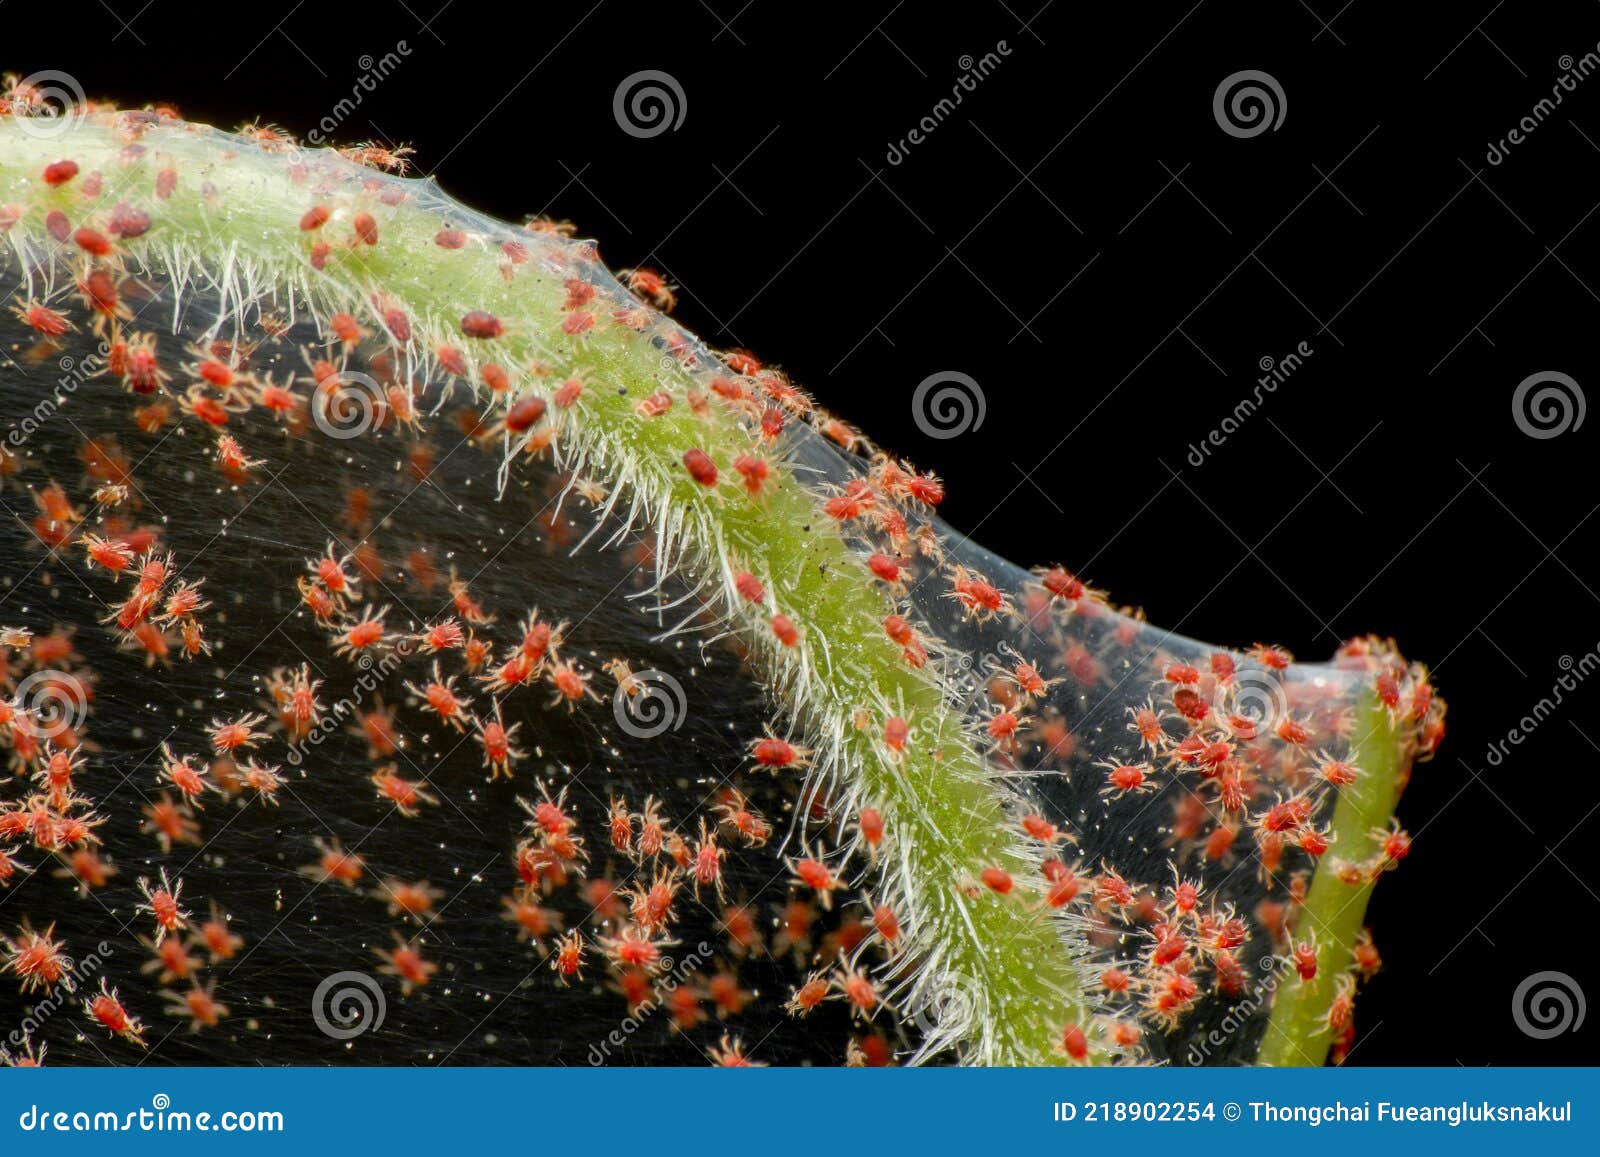 super macro photo of group of red spider mite infestation on vegetable. insect concept